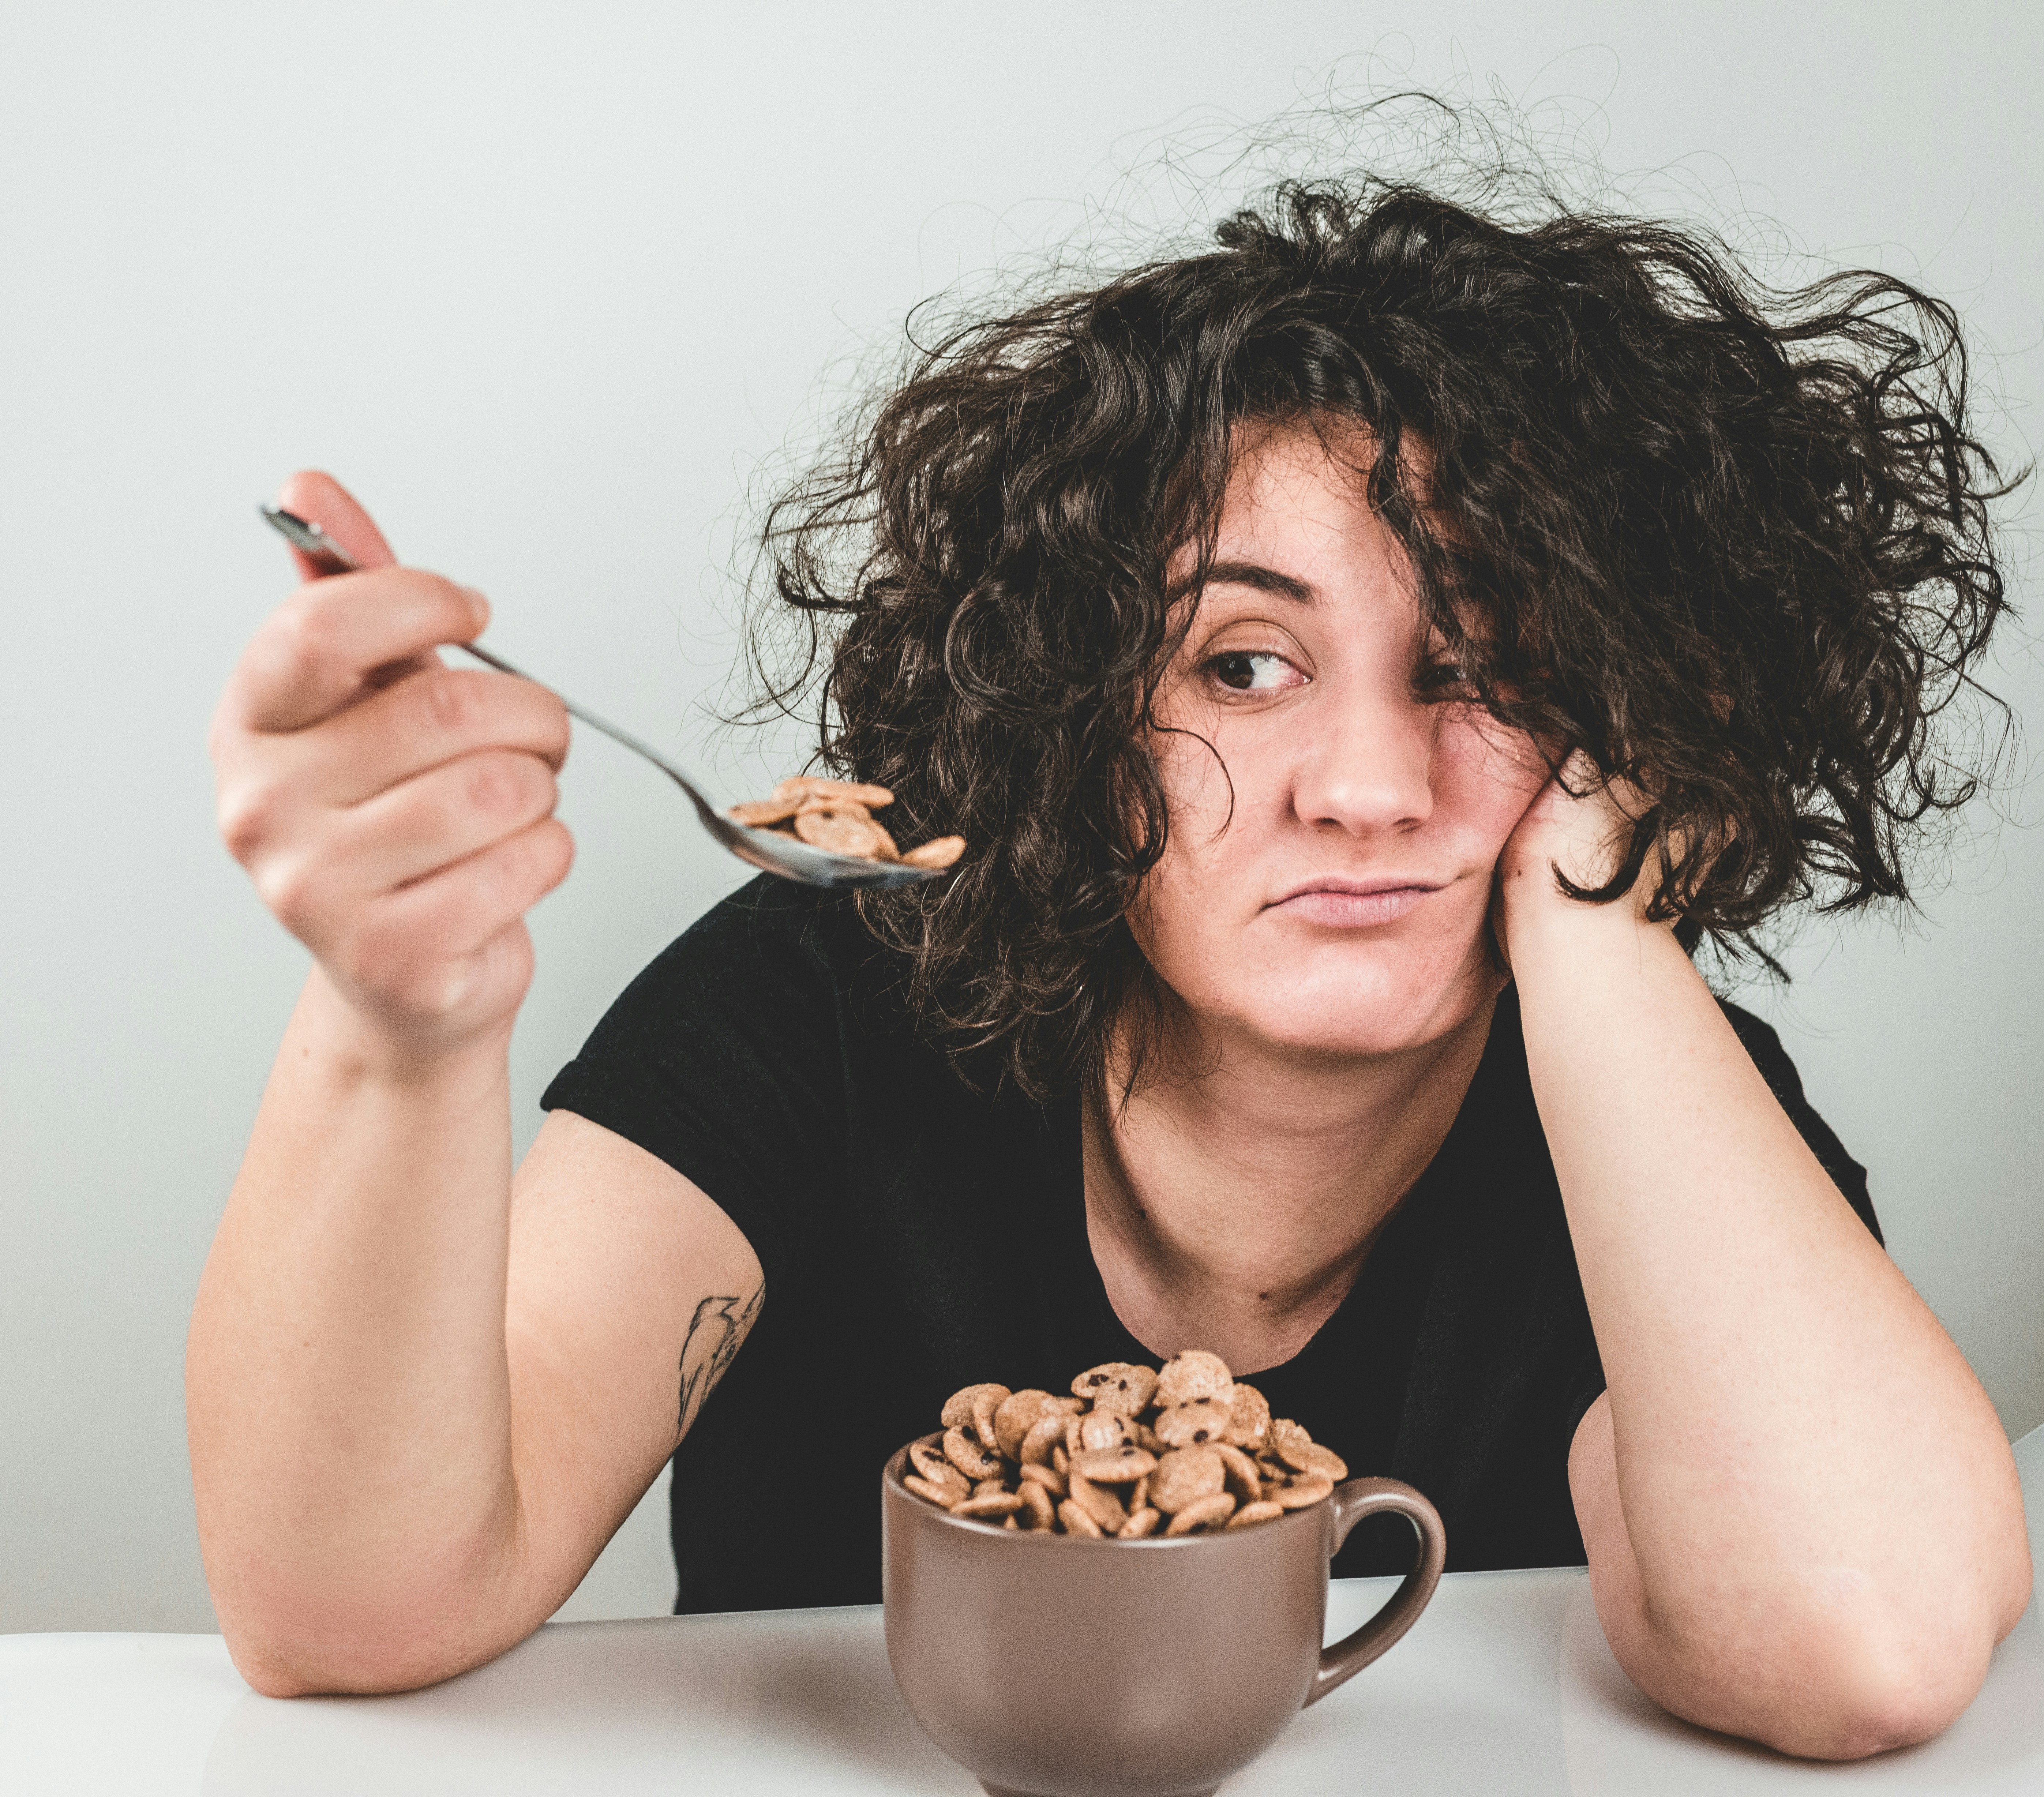 Fear of food, which results in restriction or avoidance of certain foods is one of the signs of eating disorders. : Unsplash: Tamas Pap Unsplash Unsplash license